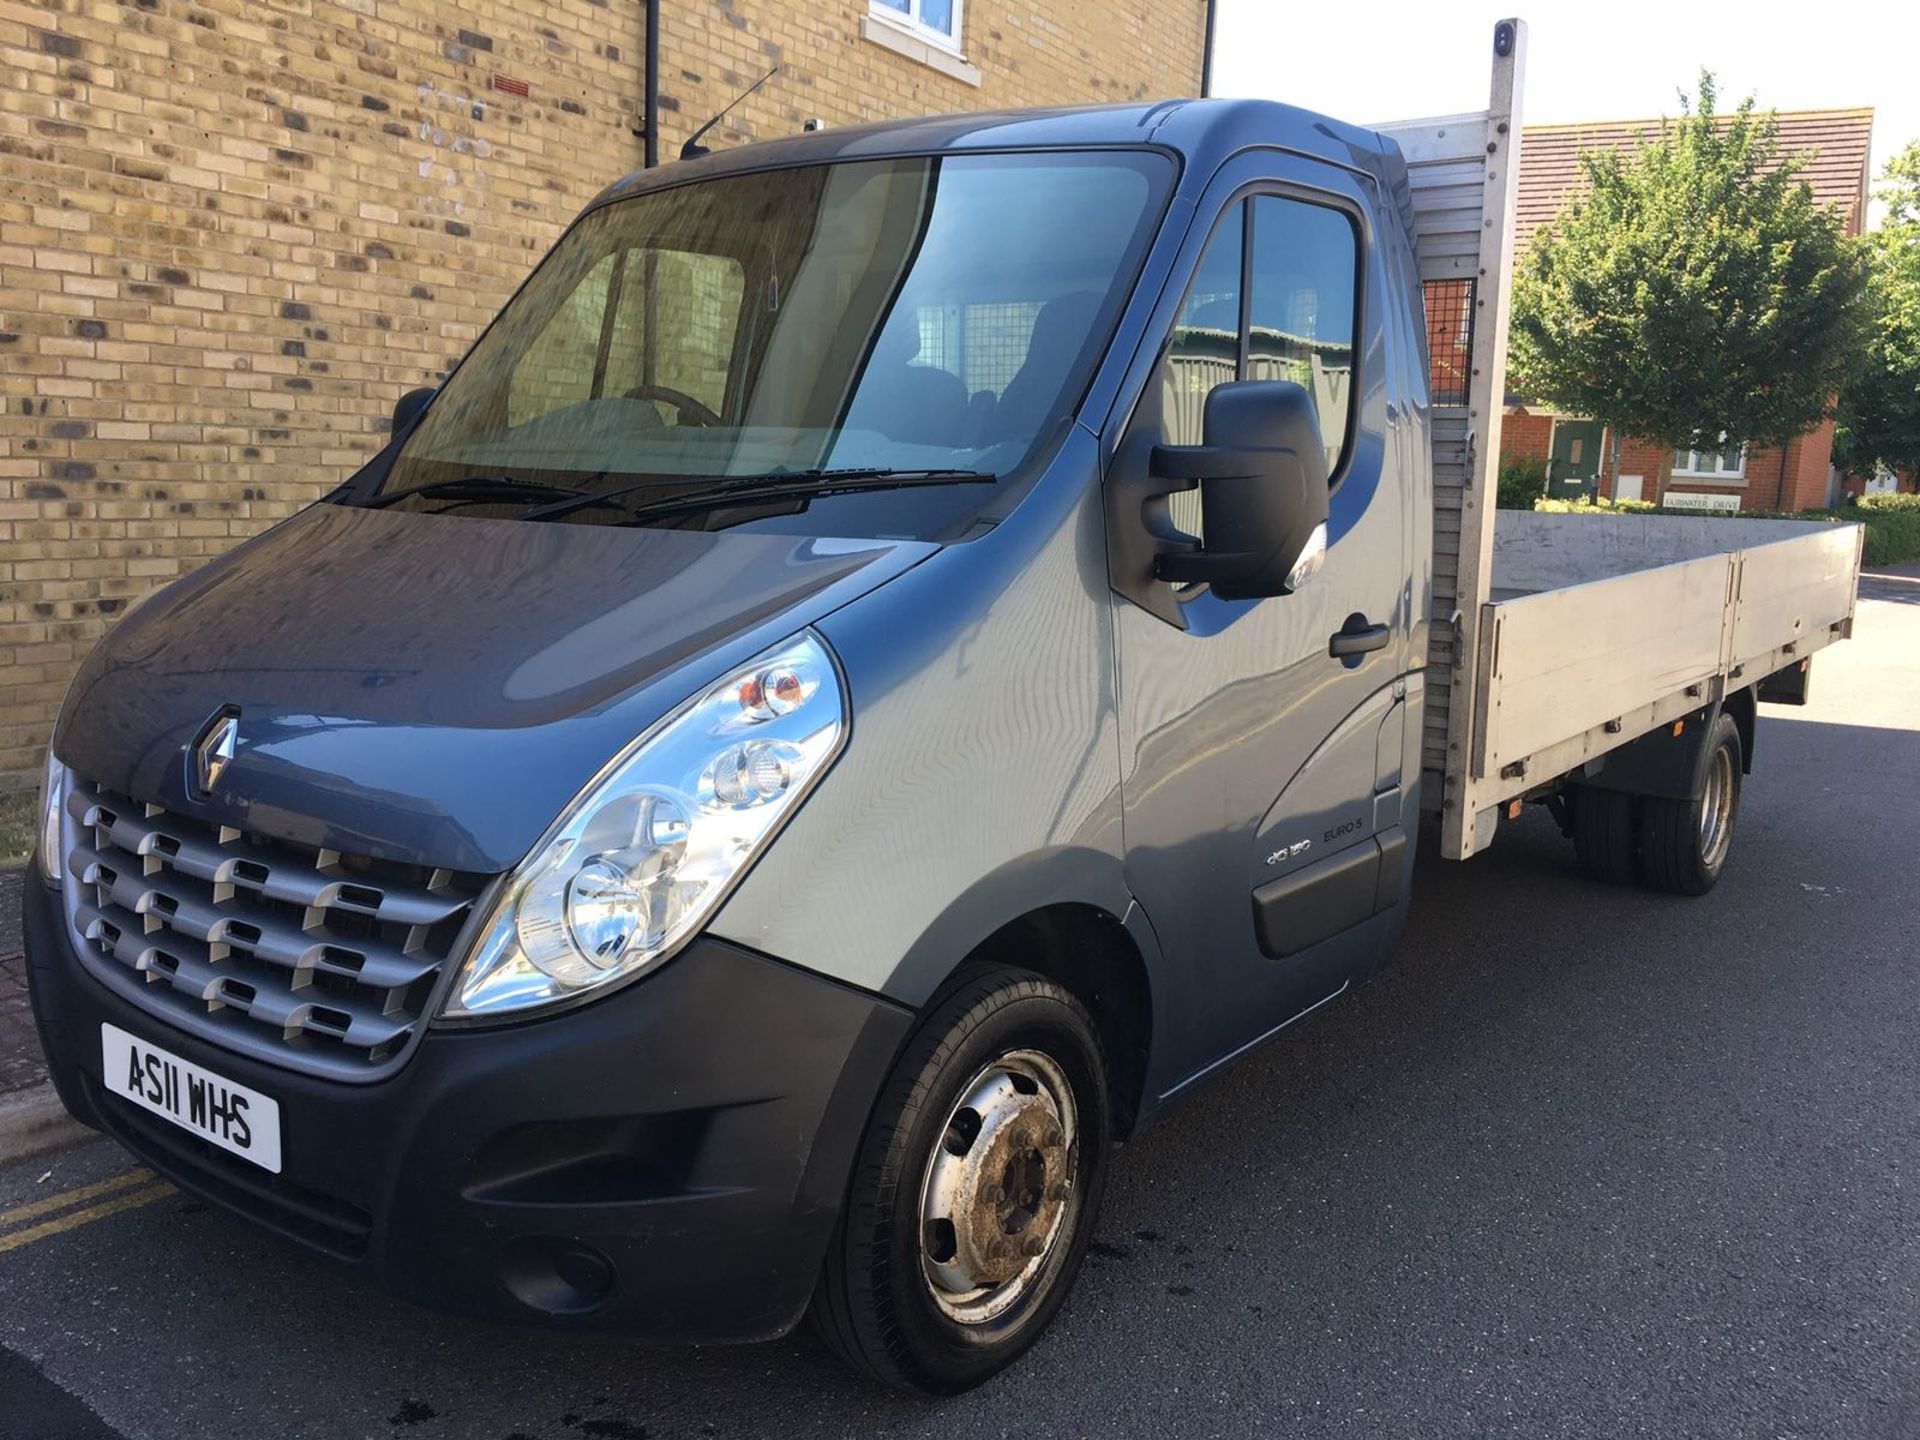 2012 RENAULT MASTER 2.3 DCI LL35 DROPSIDE PICKUP 3.5 TON GROSS TWIN WHEEL. 137,000 MILES. - Image 2 of 26